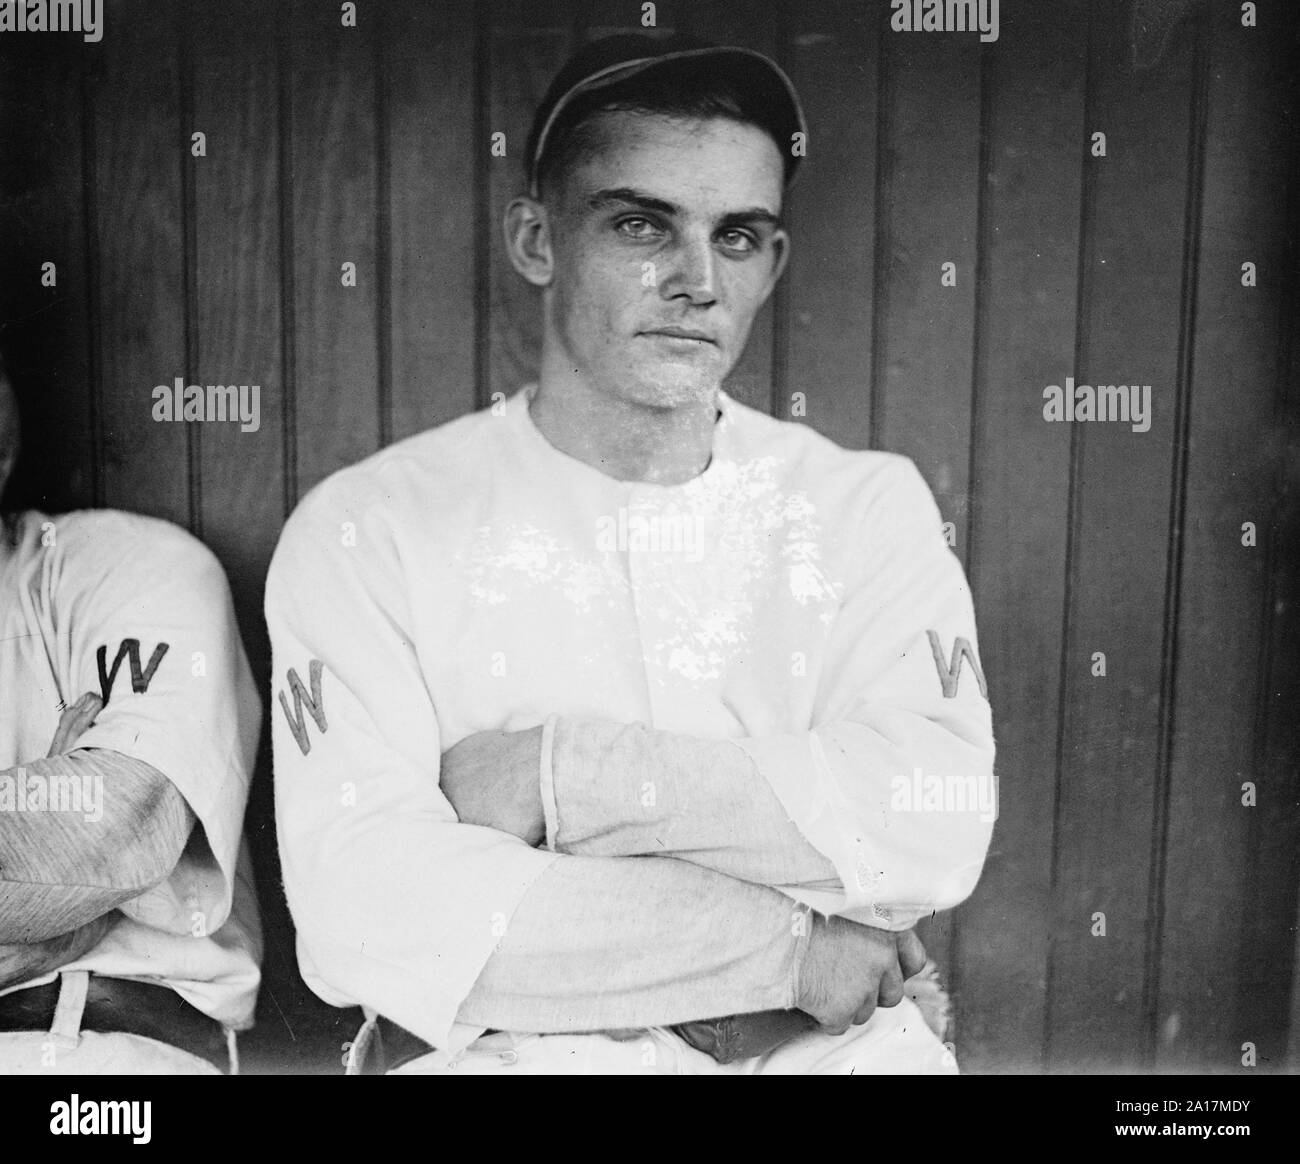 Chick Gandil, Charles Arnold 'Chick' Gandil (1888 – 1970) professional baseball player, best known as the ringleader of the players involved in the 1919 Black Sox scandal. Stock Photo